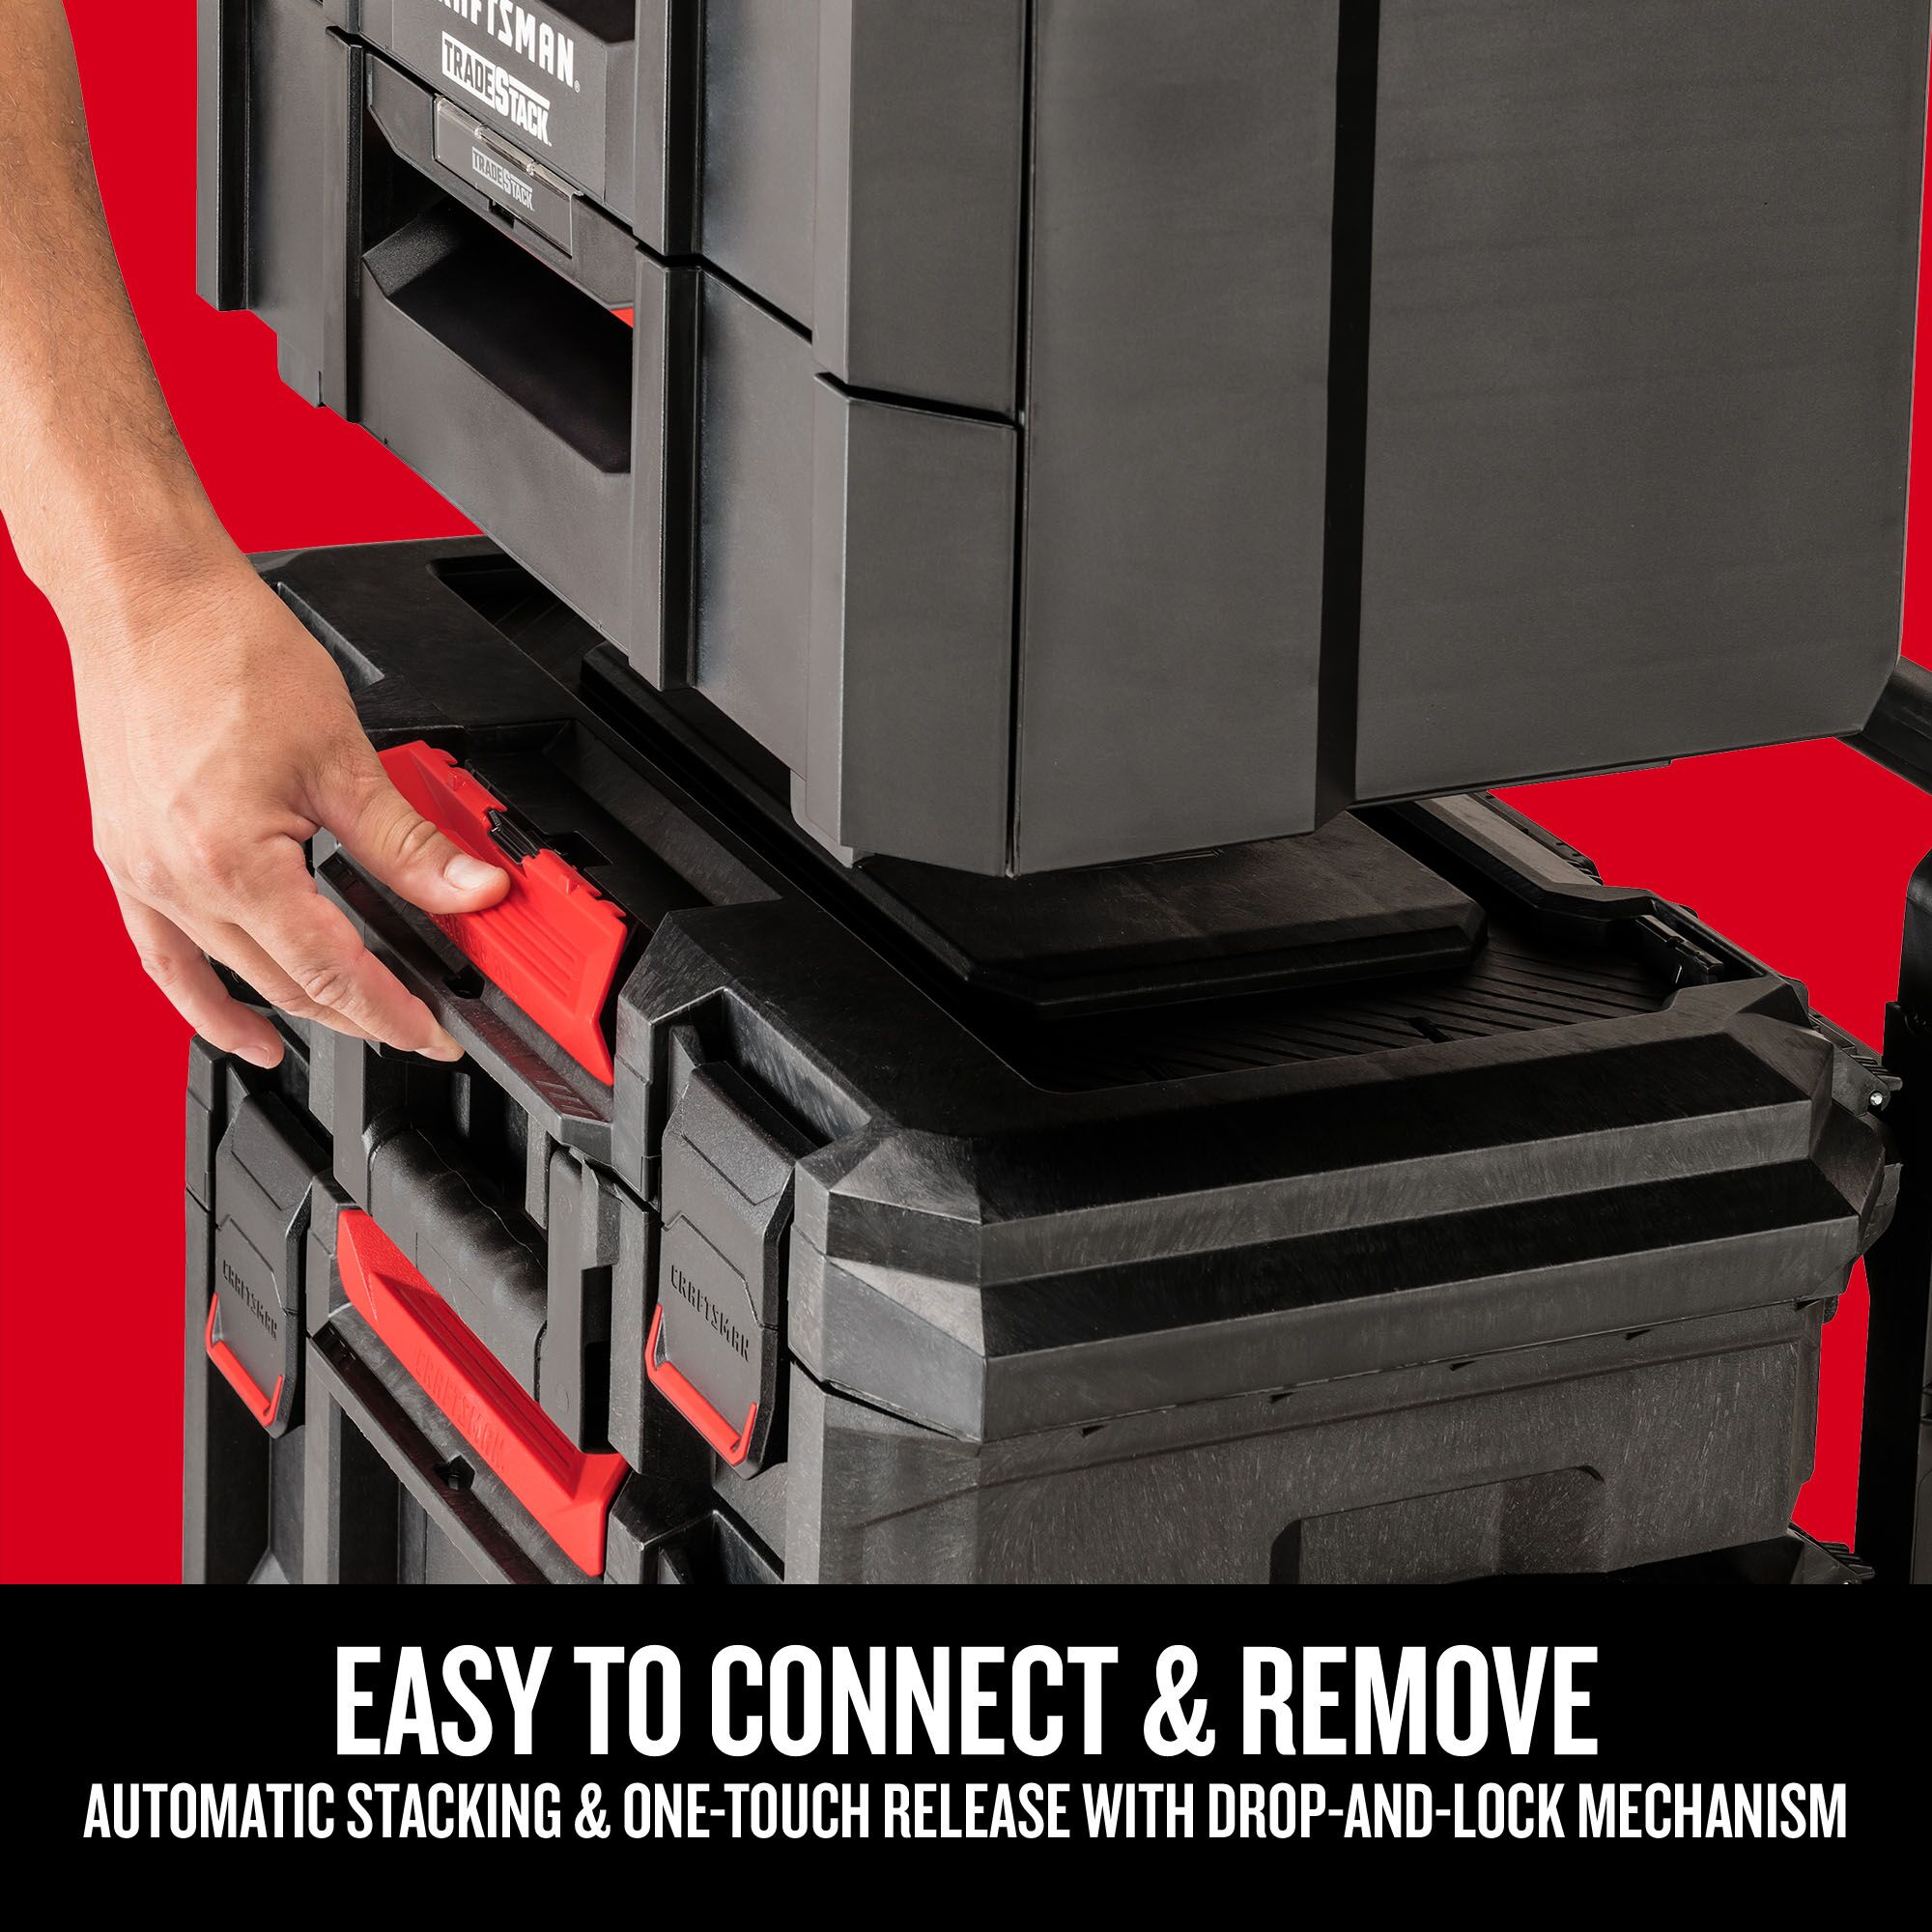 Easy to Connect & Remove. Automatic Stacking & One-Touch Release with Drop-and-Lock Mechanism.